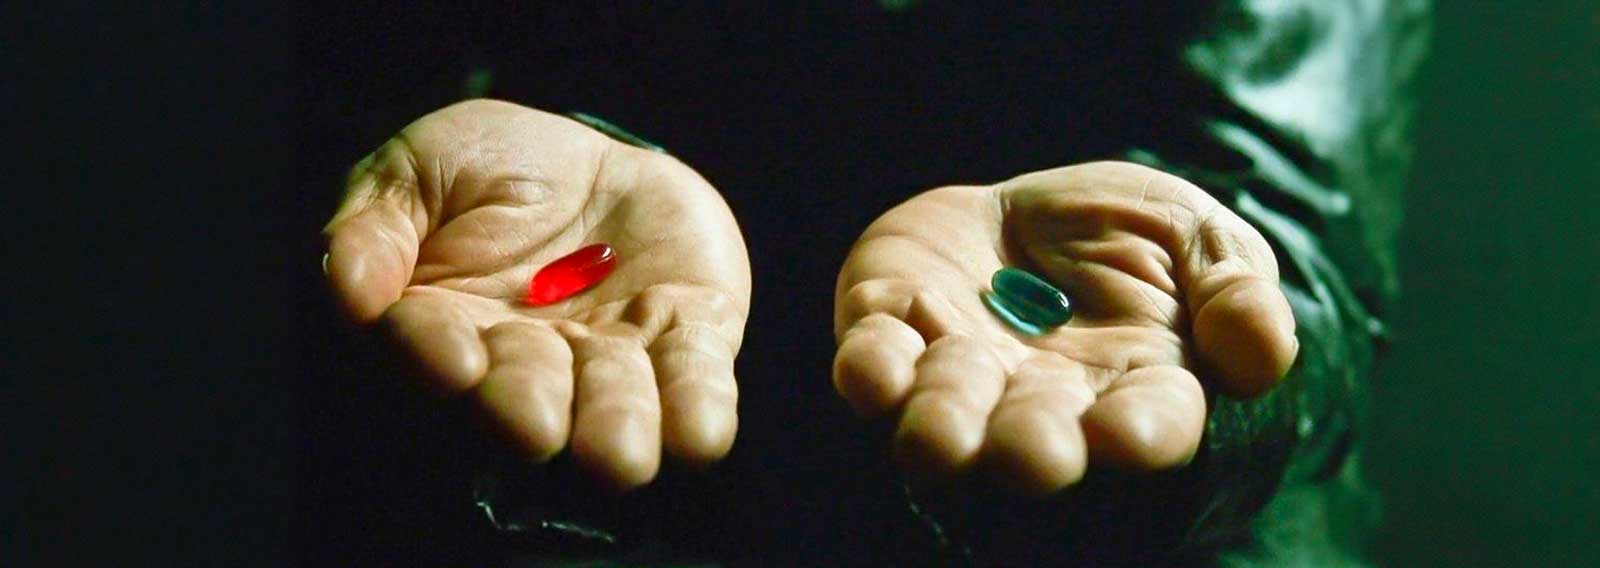 Red Pill, ­­Blue Pill or White Pill: Which Will You Take?